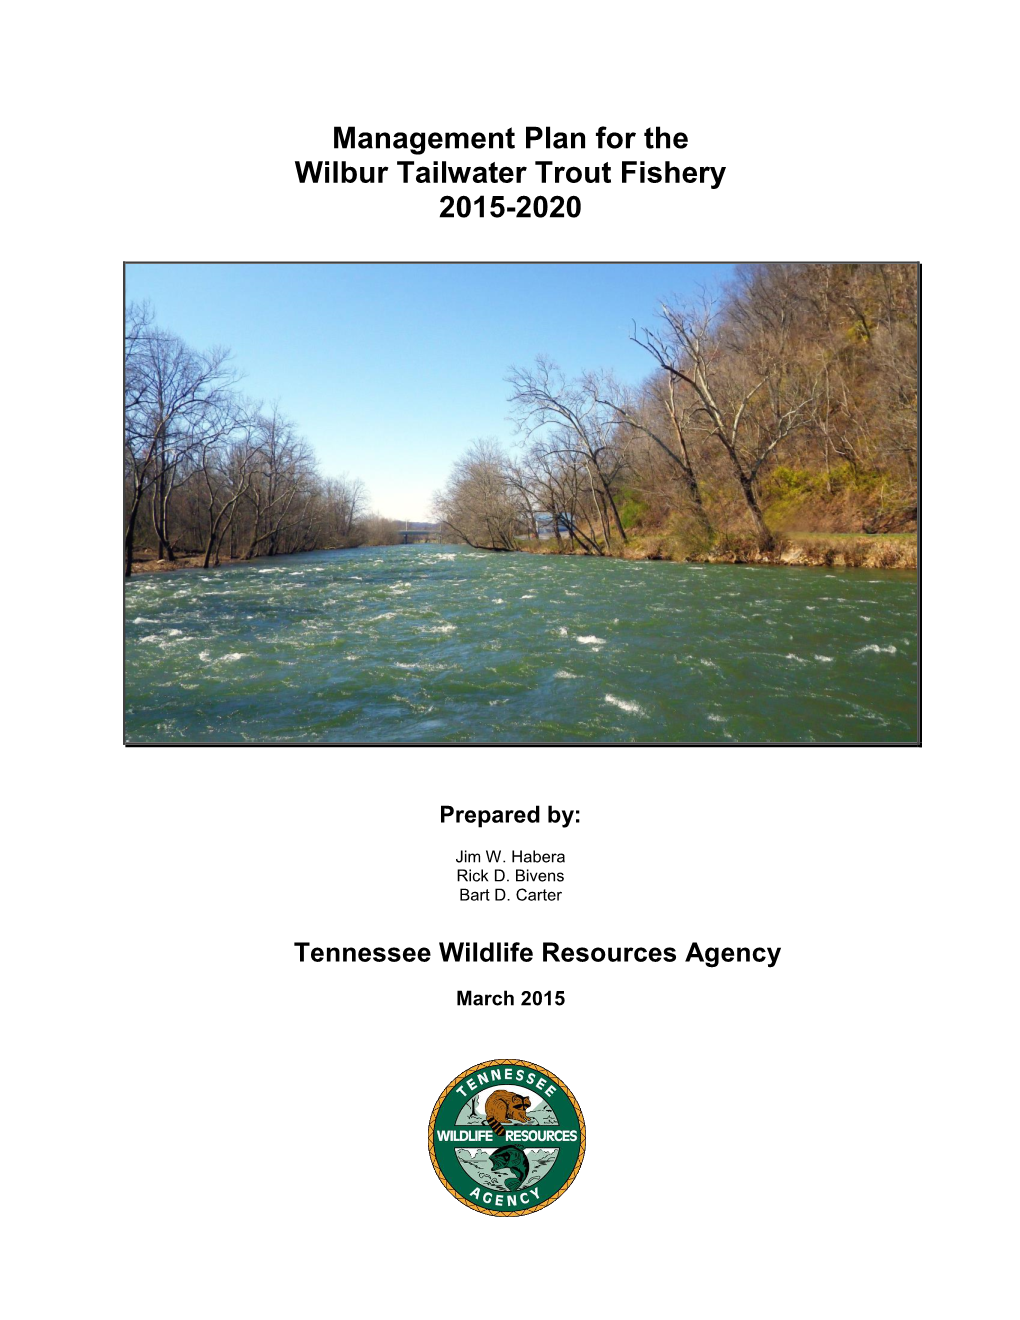 Management Plan for the Wilbur Tailwater Trout Fishery 2015-2020